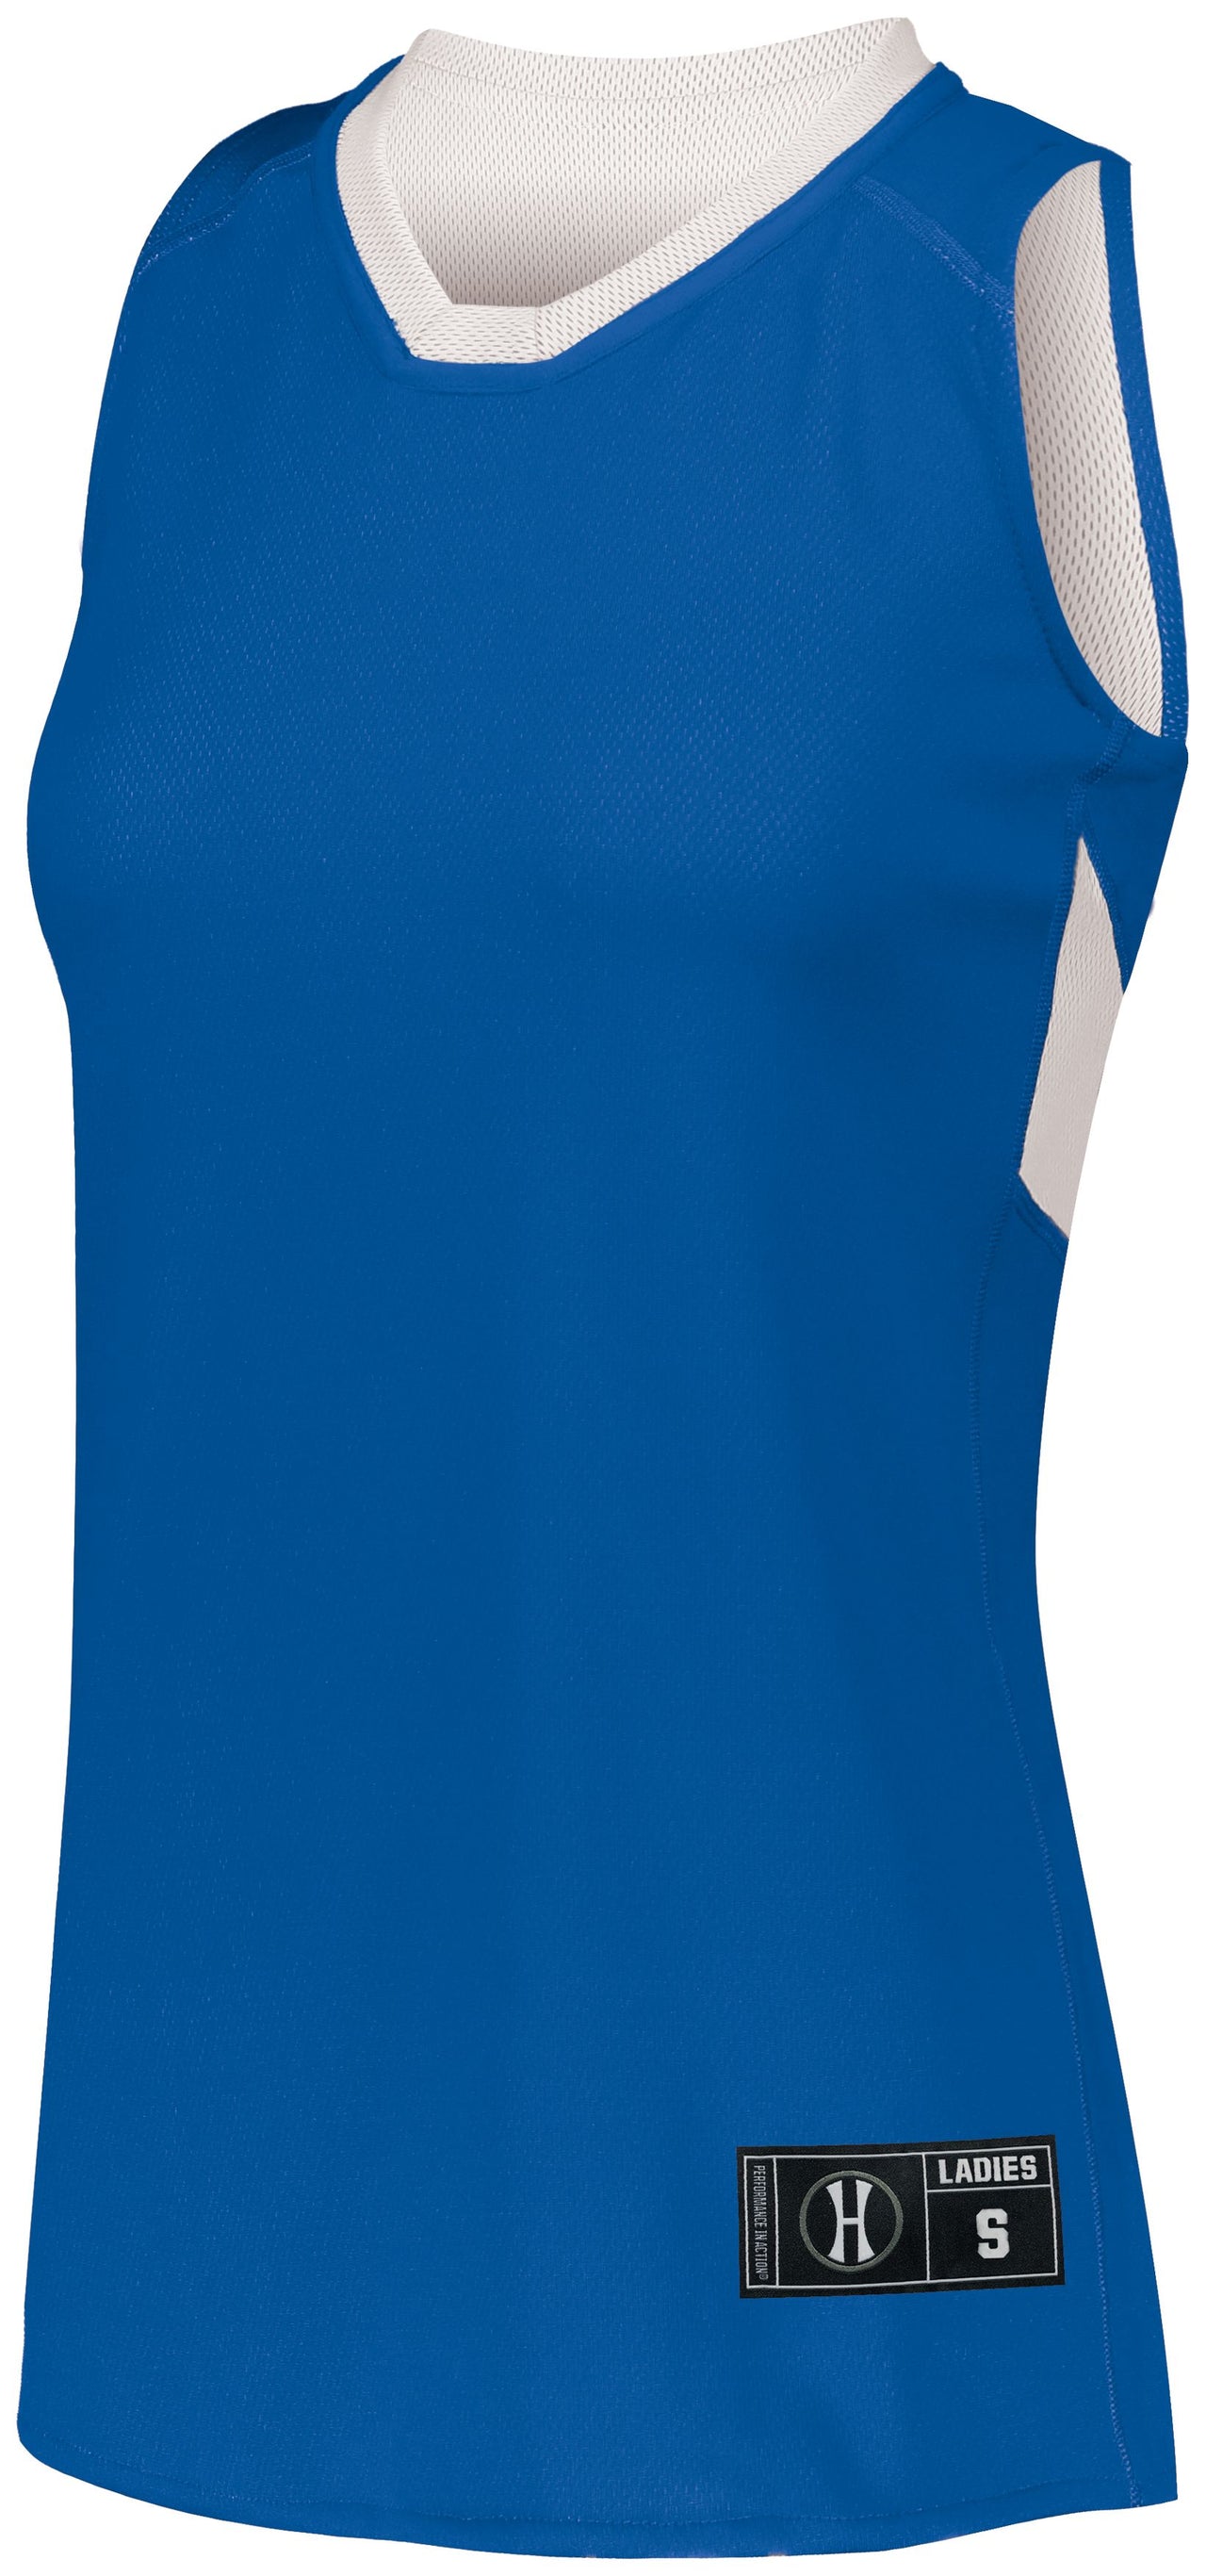 Ladies Dual-Side Single Ply Basketball Jersey - 224378